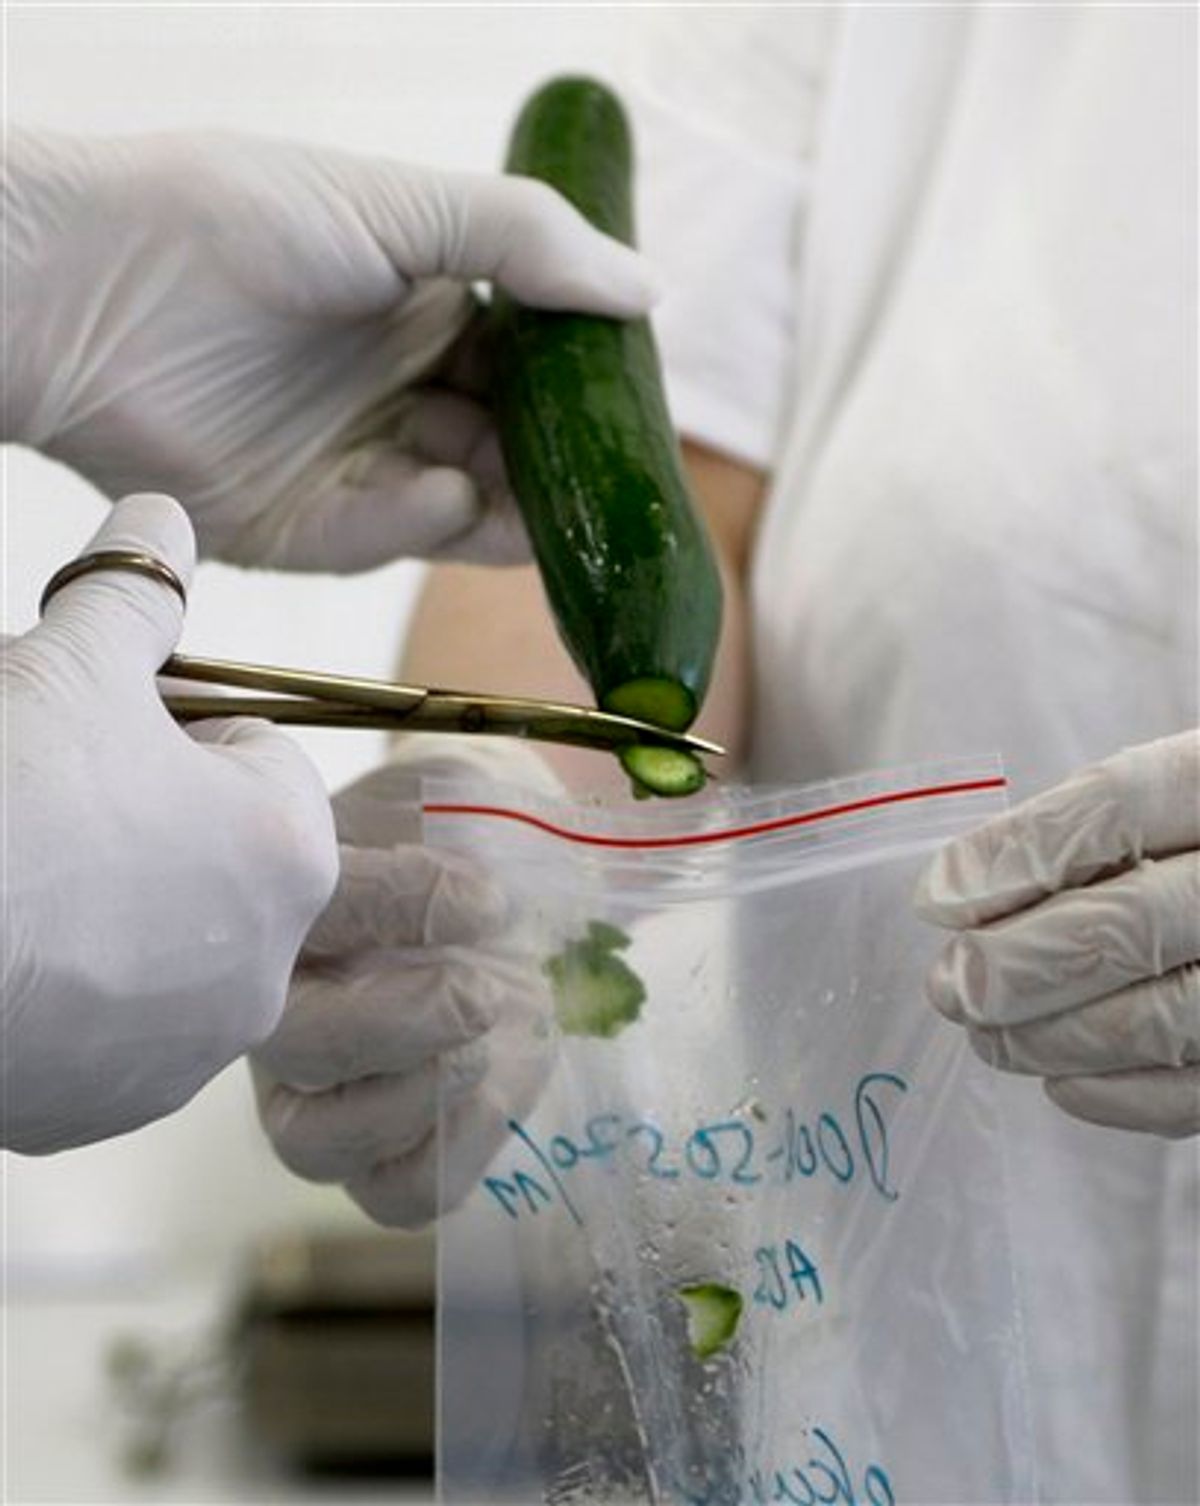 Chief of the laboratory in research into the Escherichia Coli bacterium at the Brno research institute  Pavel Alexa, left, and his assistant Gabriela Glocknerova, right, take samples from a cucumber for a molecular biological test in Brno, Czech Republic, Wednesday, June 1, 2011. The ongoing outbreak of E. coli has claimed 16 people and around 1500 infected across Europe. The laboratory is testing the vegetables for the Czech market. (AP Photo/Petr David Josek) (AP)